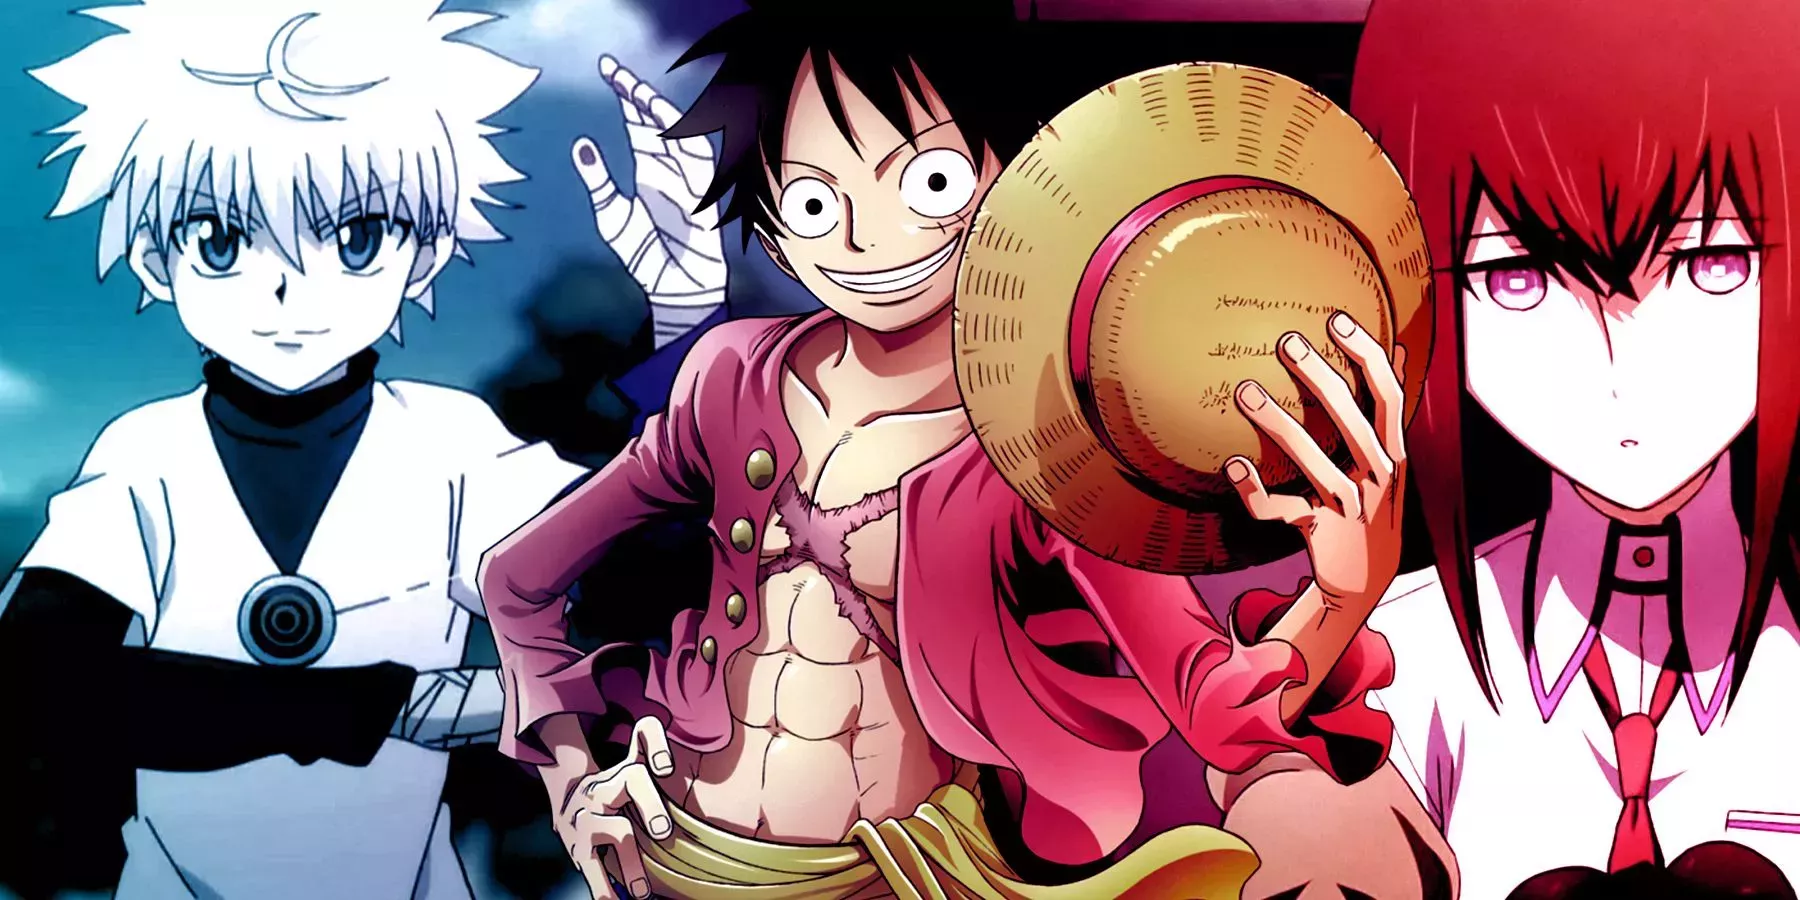 On the left, Killua of 'Hunter X Hunter' plays with a yo-yo. On the right, Kurisu of 'Steins;Gate' stares out thoughtfully. Luffy of 'One Piece' is seen in the middle, smiling and holding his straw hat.